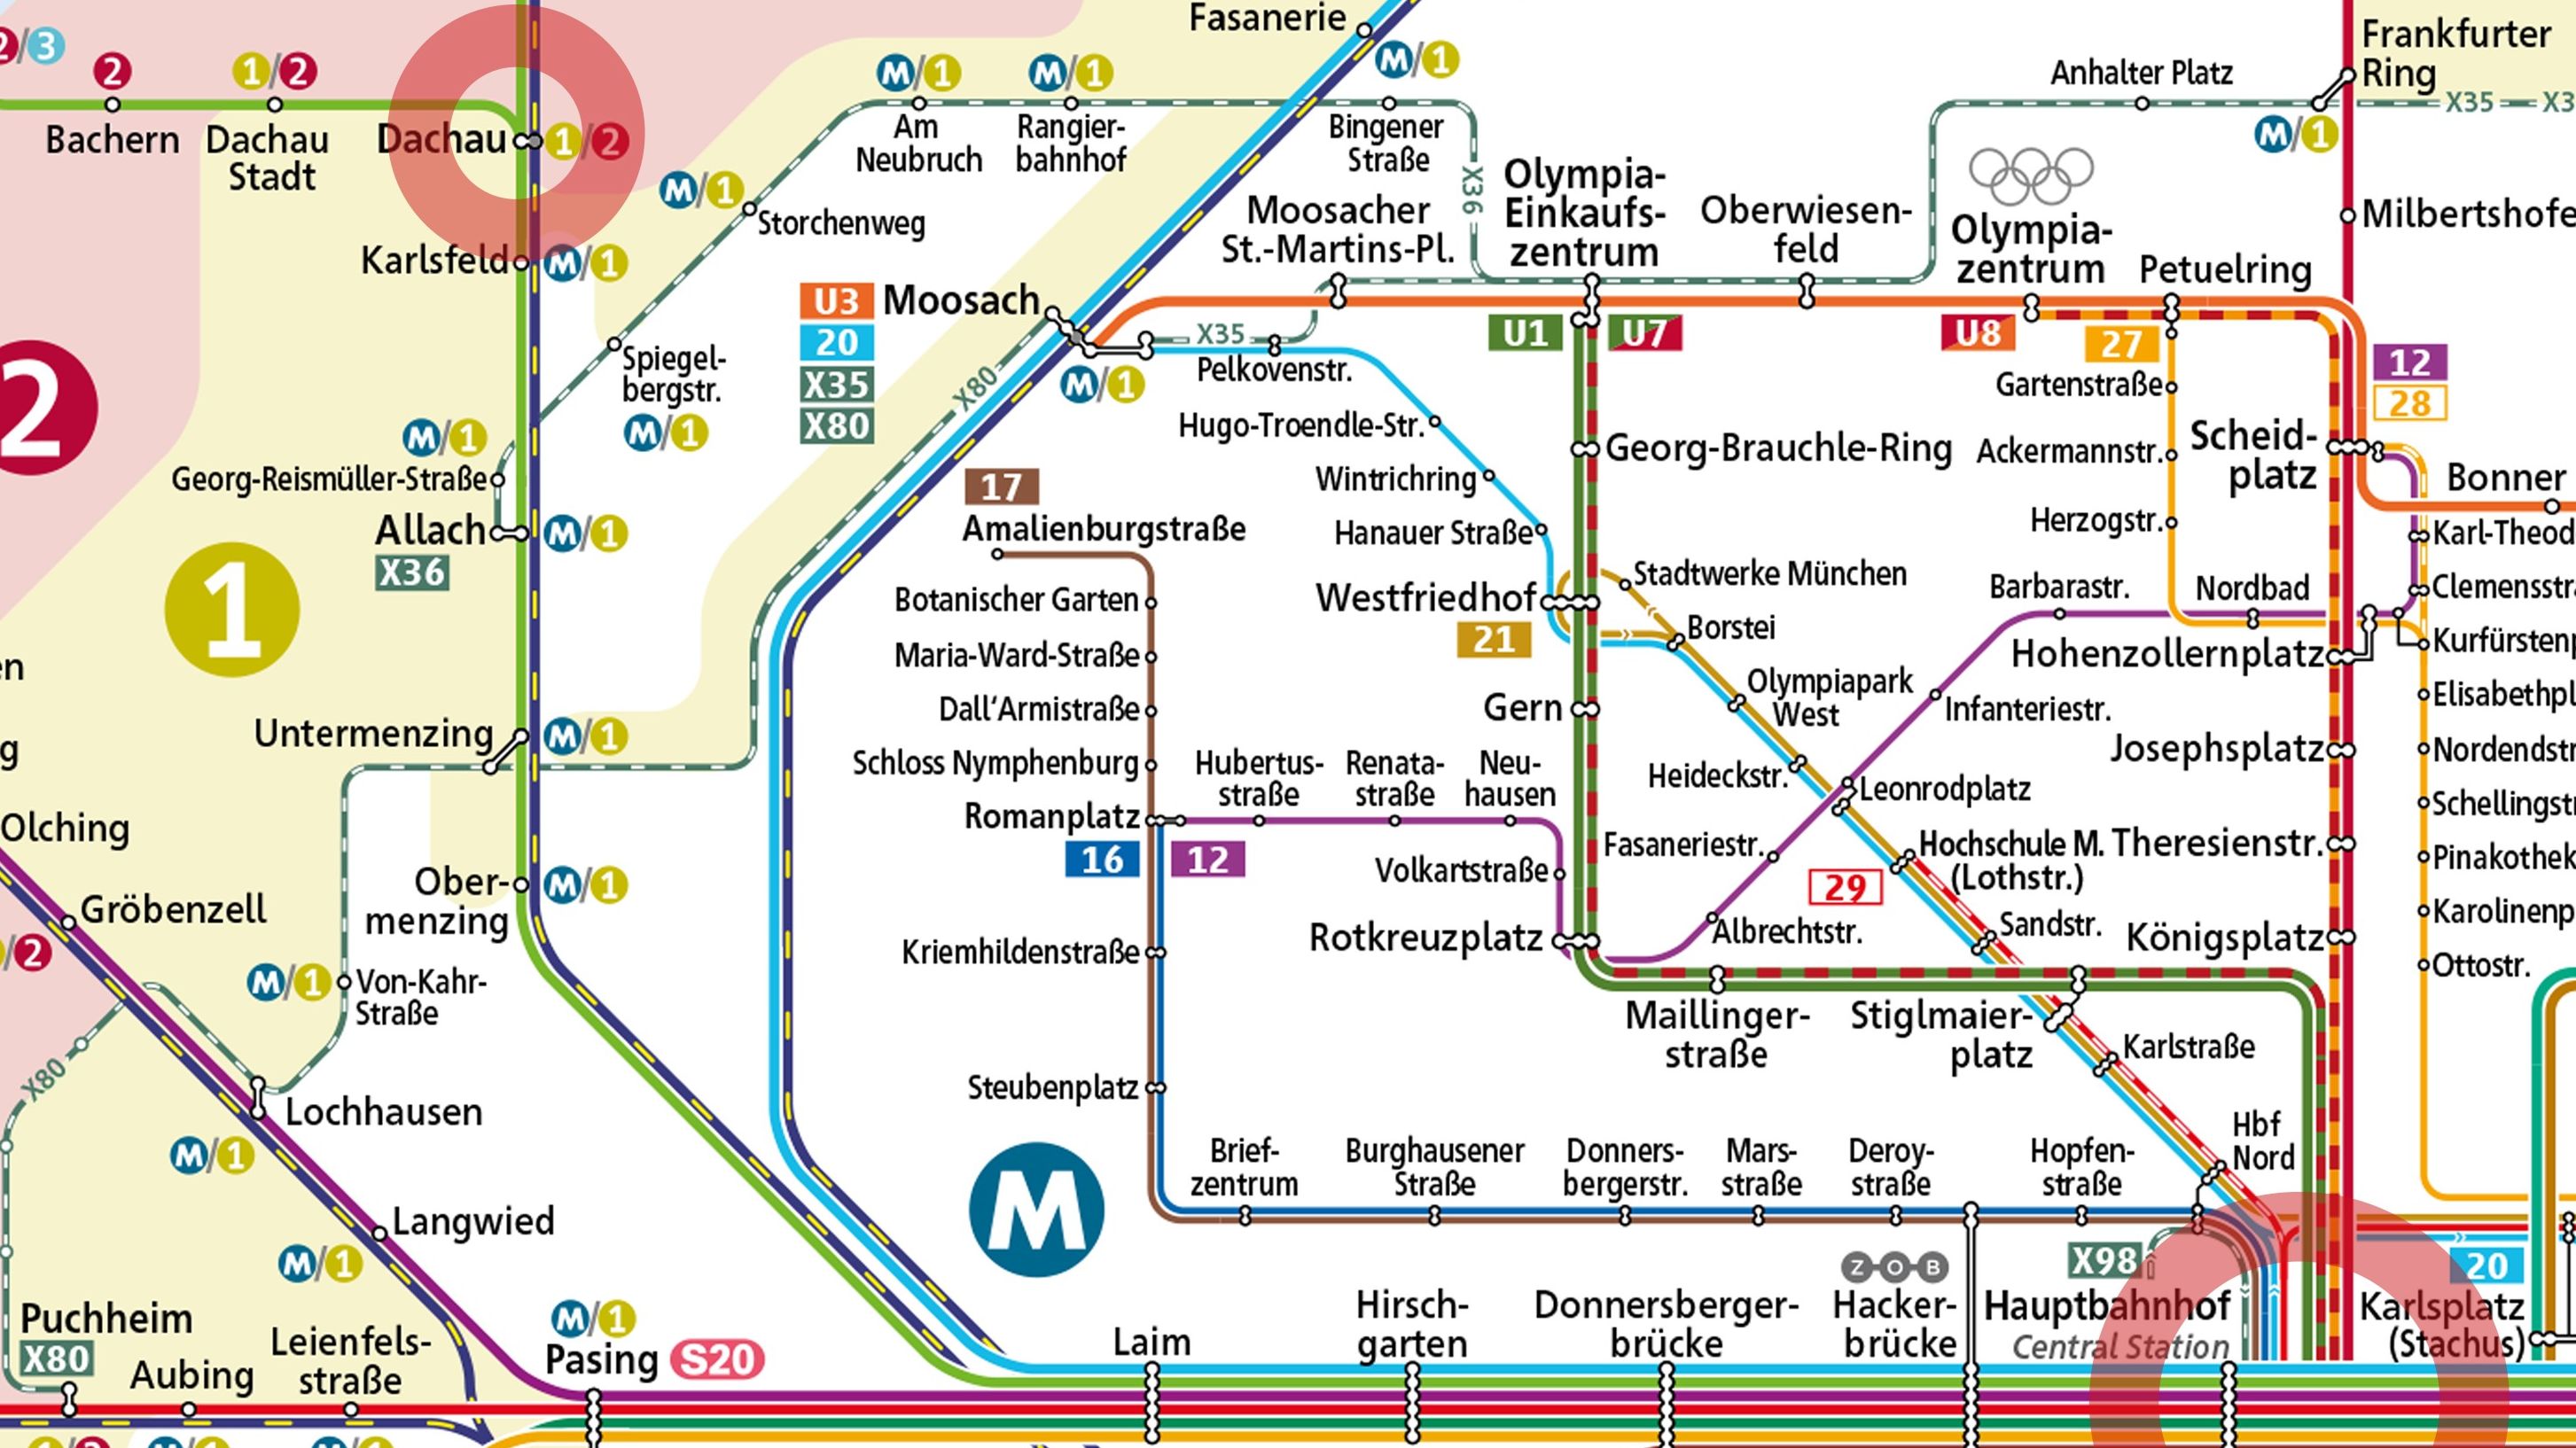 Overview map of public transport in the Munich area and Dachau